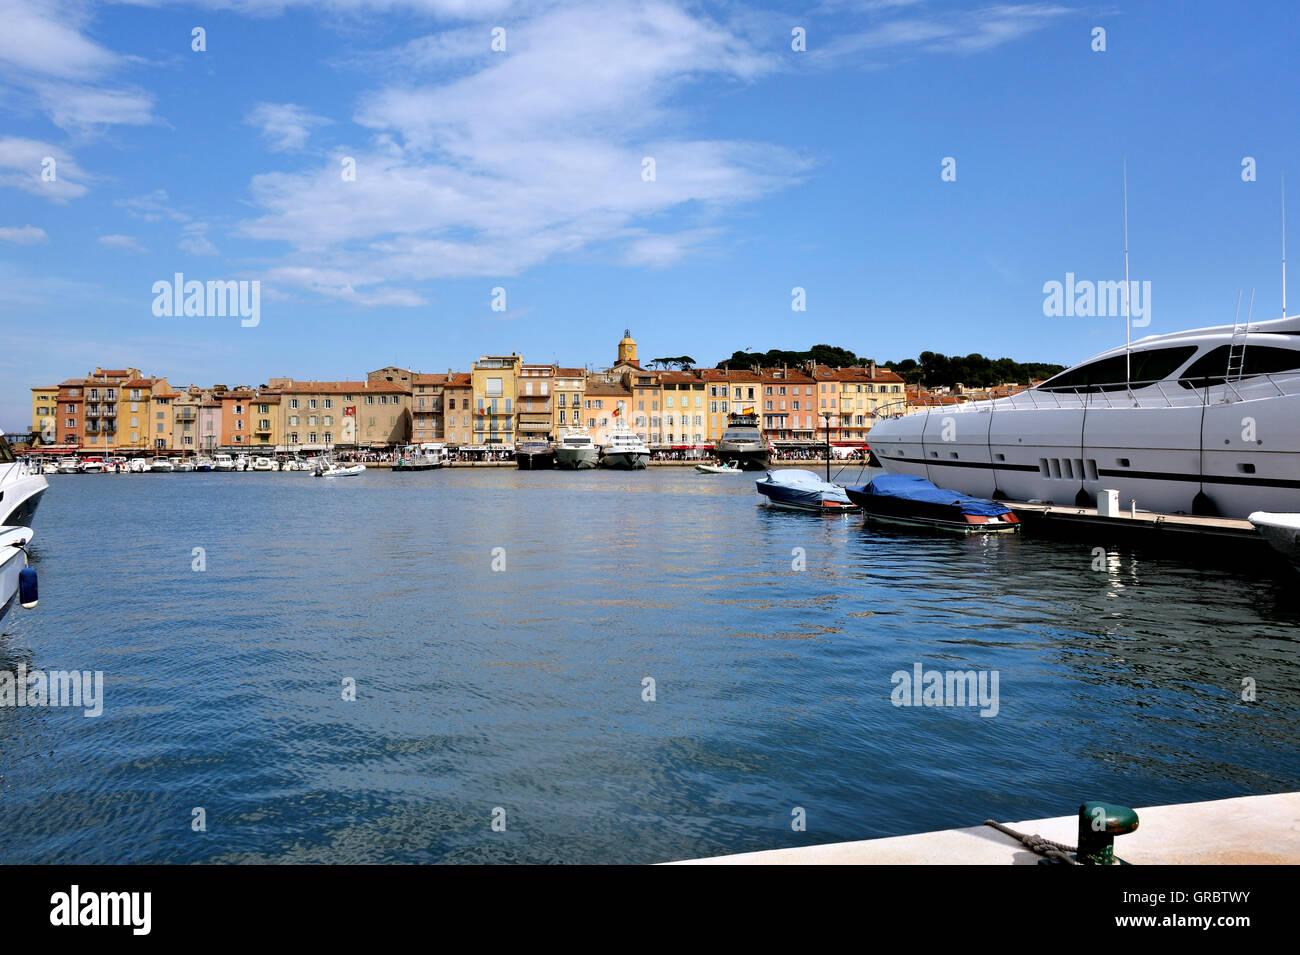 In The Port Of Saint-Tropez, Southern France, French Alps, France Stock Photo